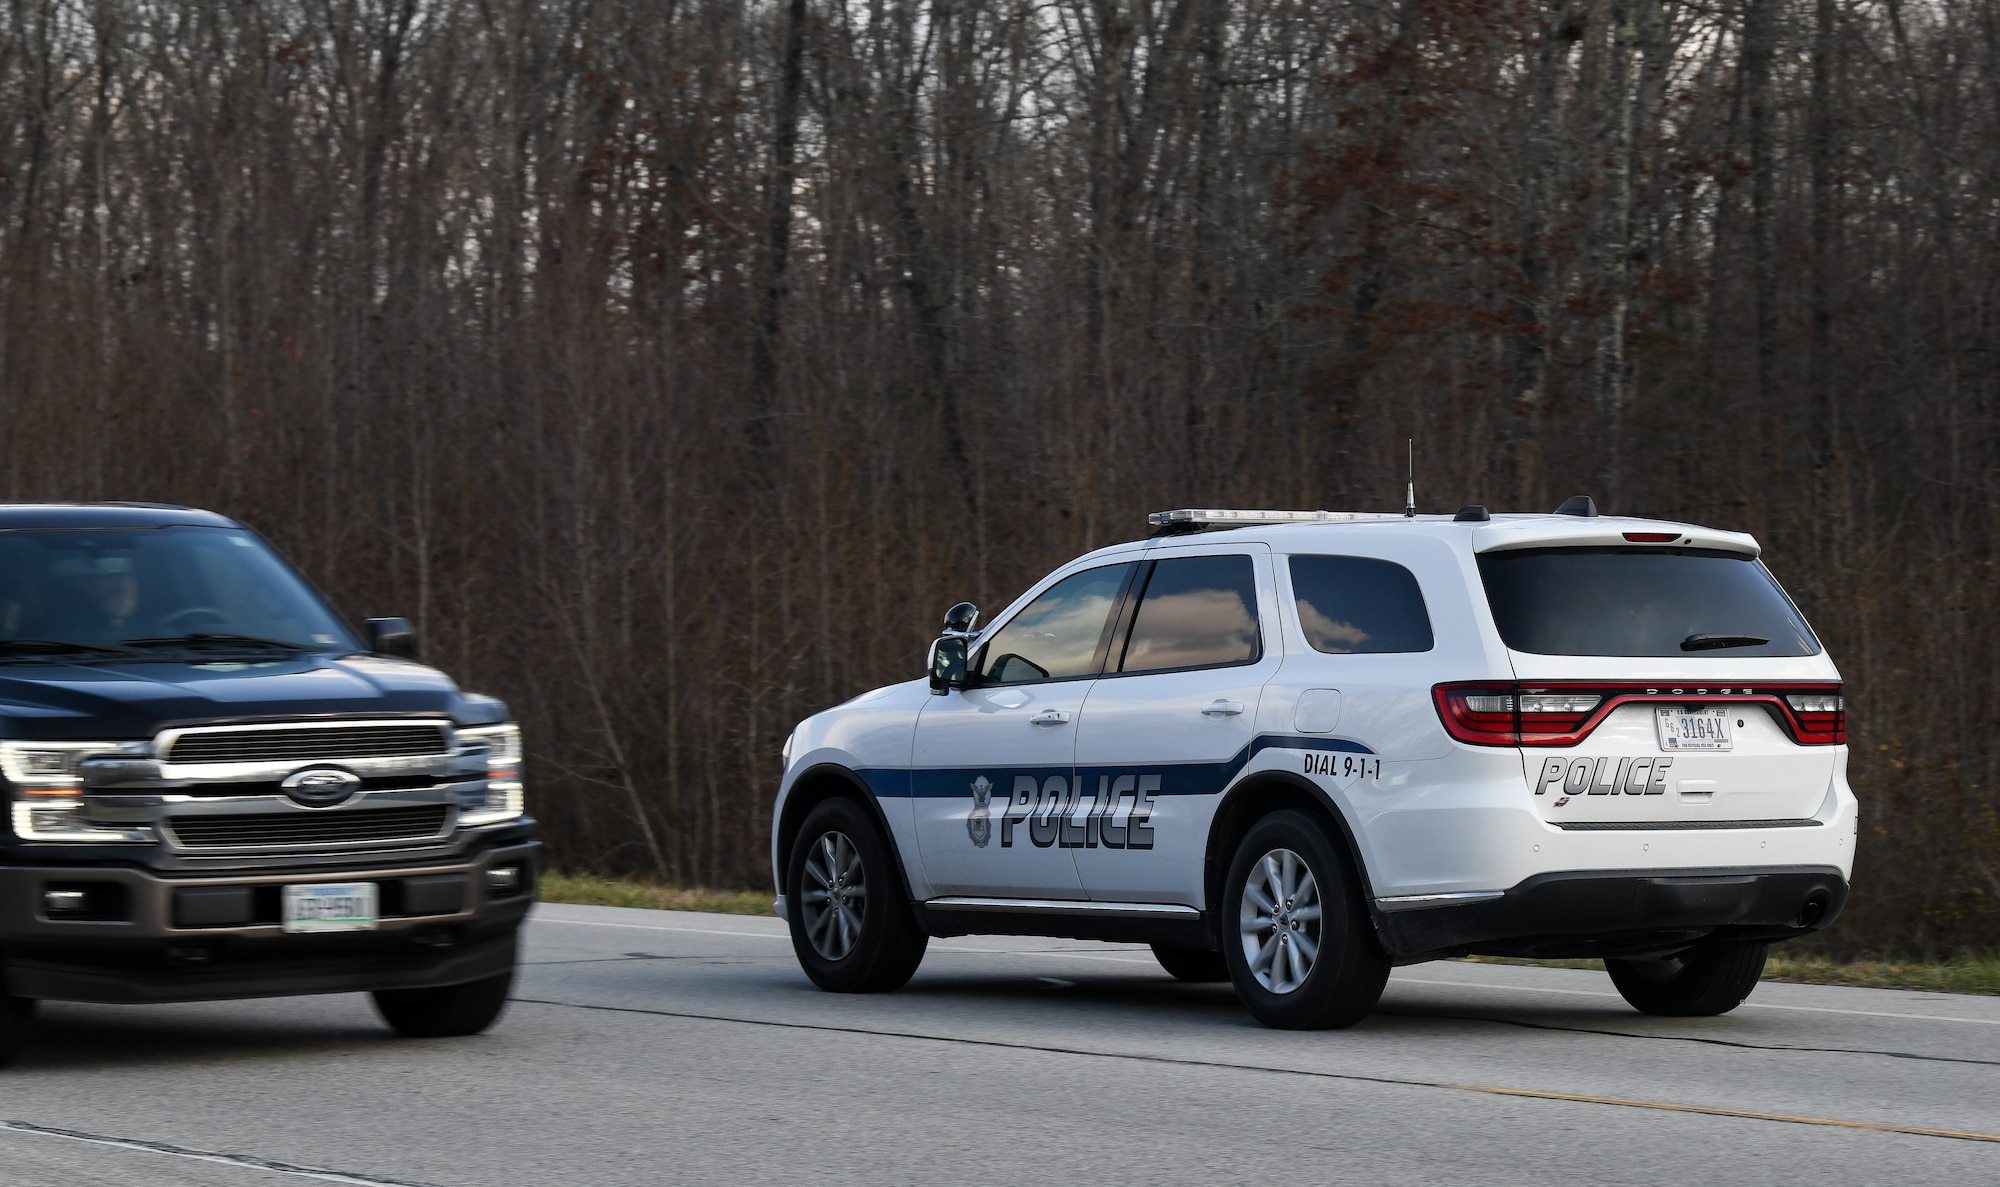 Sgt. George Blasingame, a Dept. of the Air Force Police Officer at Arnold Air Force Base, Tenn, patrols along Wattendorf Highway to watch for motorists committing moving violations, Dec. 17, 2020. DAF Officers began patrolling Arnold in late August. The SUV driven by Blasingame was recently acquired for the new force, and another SUV is also on order. Motorists traveling Arnold AFB roadways should be mindful that the DAF officers can issue citations for moving violations. Motorists who are cited for moving violations on Arnold AFB property are assessed points. Points are entered into the Air Force Justice Information System and assessed against their on-base driving record. Accumulation of 12 points in 12 months or 18 points in 24 months normally results in loss of driving privileges for up to a year. If someone gets caught driving during their revocation period, an additional year is usually added to the penalty. (U.S. Air Force photo by Jill Pickett)